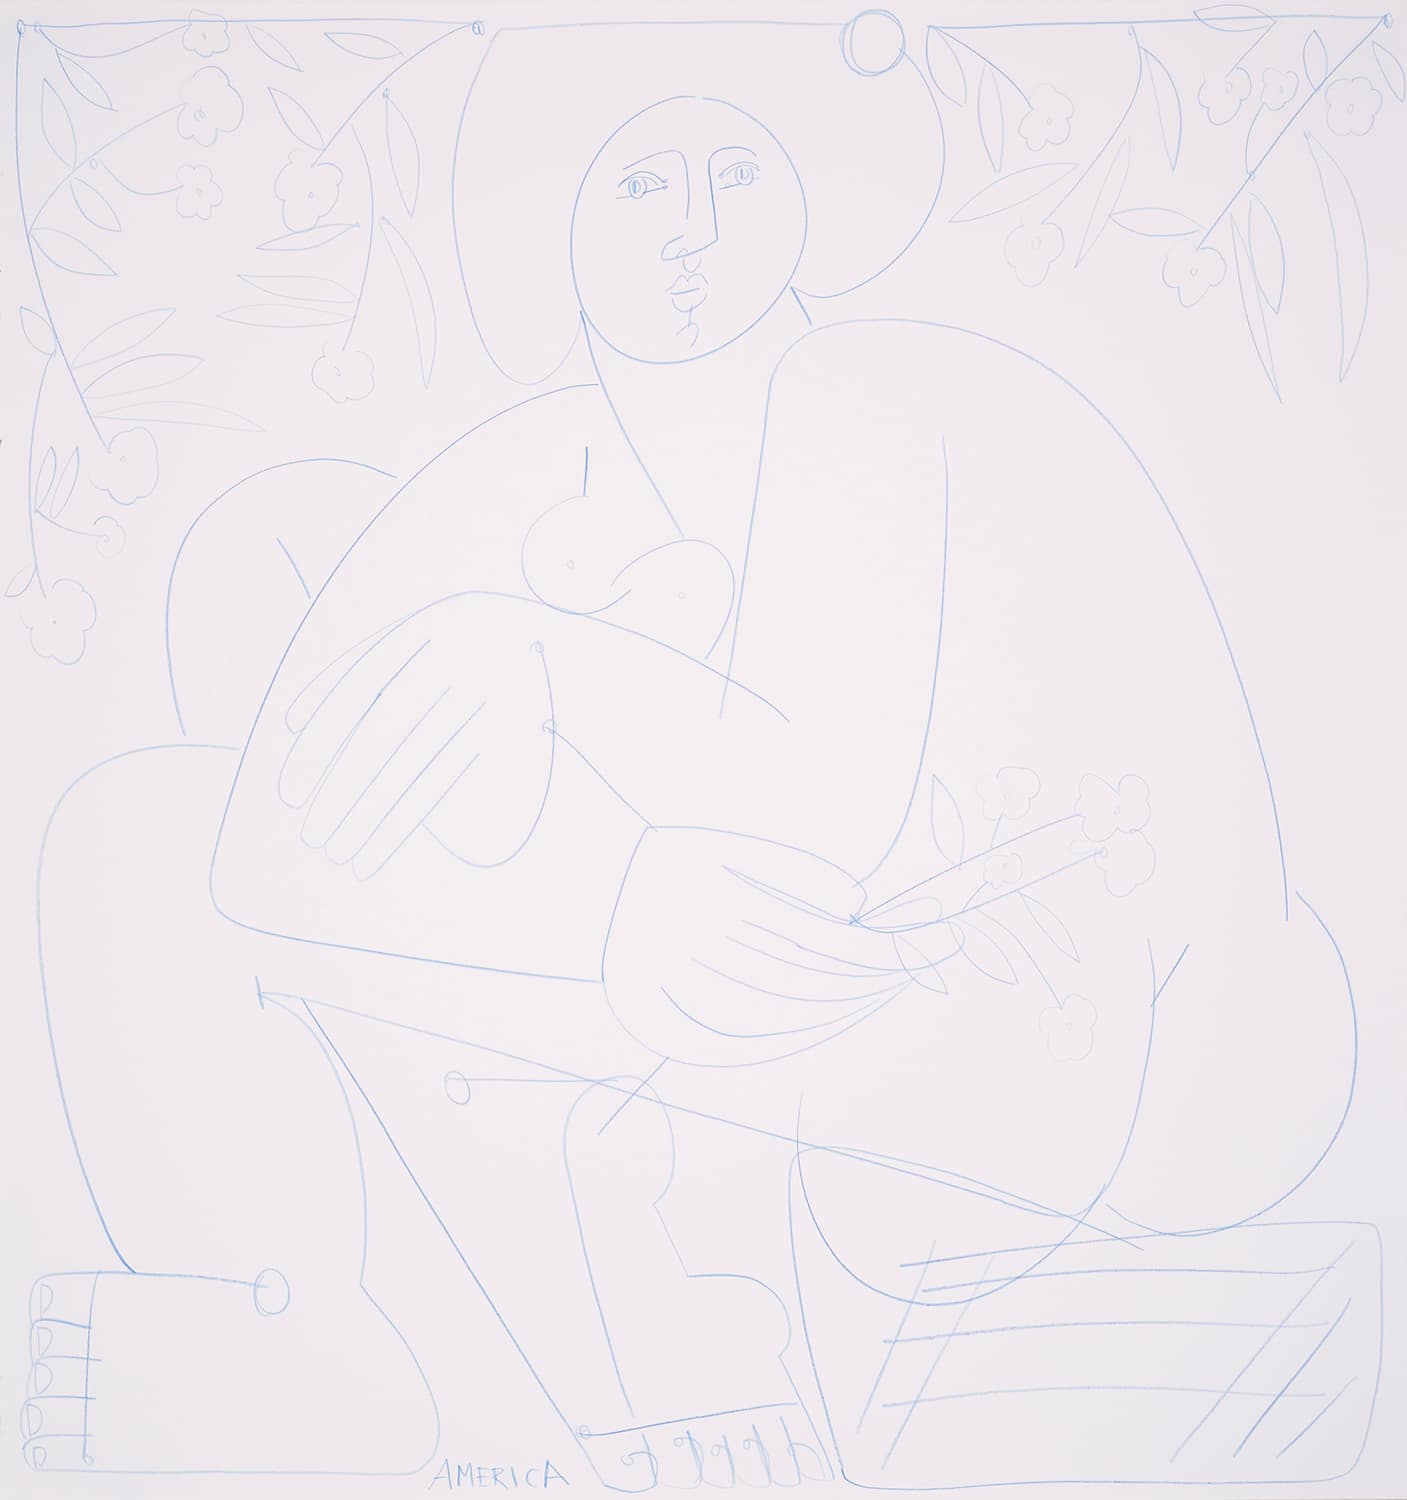 Woman Sits and Looks About_America Martin_Blue Chalk on Paper_23.5 x 22